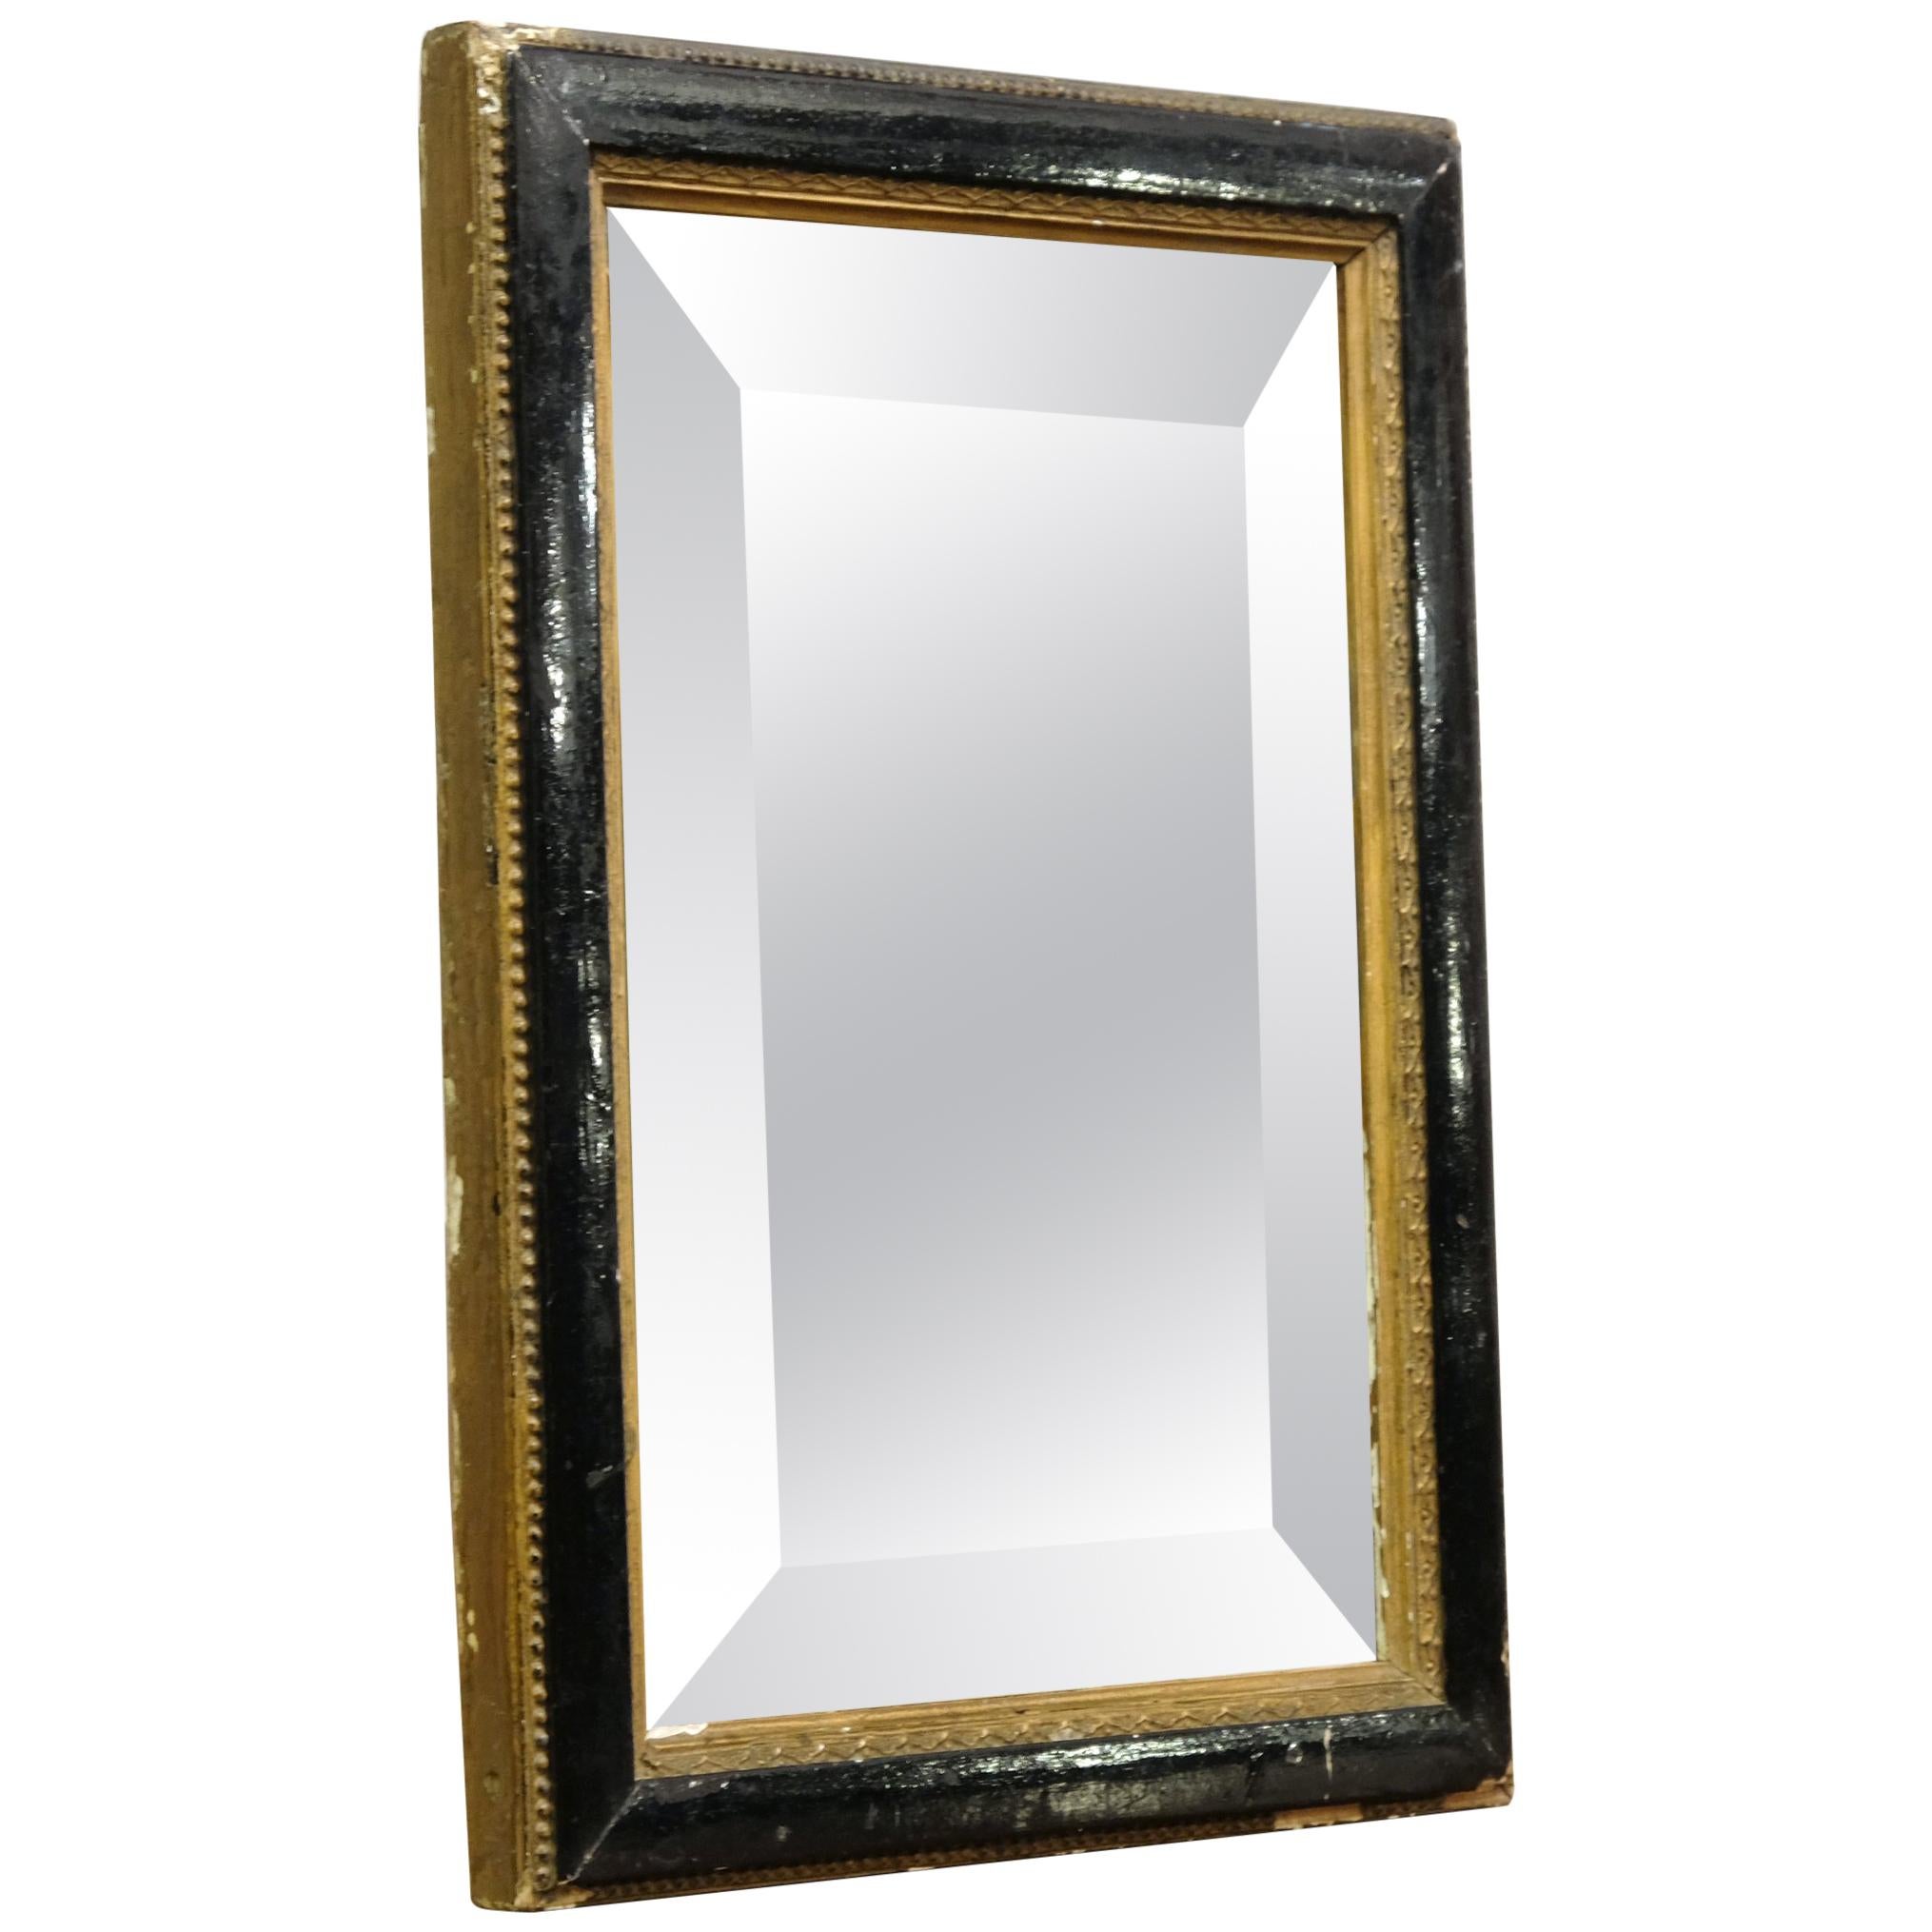 Ebonized and Gilt Framed French Double Bevelled Small Mirror, Late 19th Century